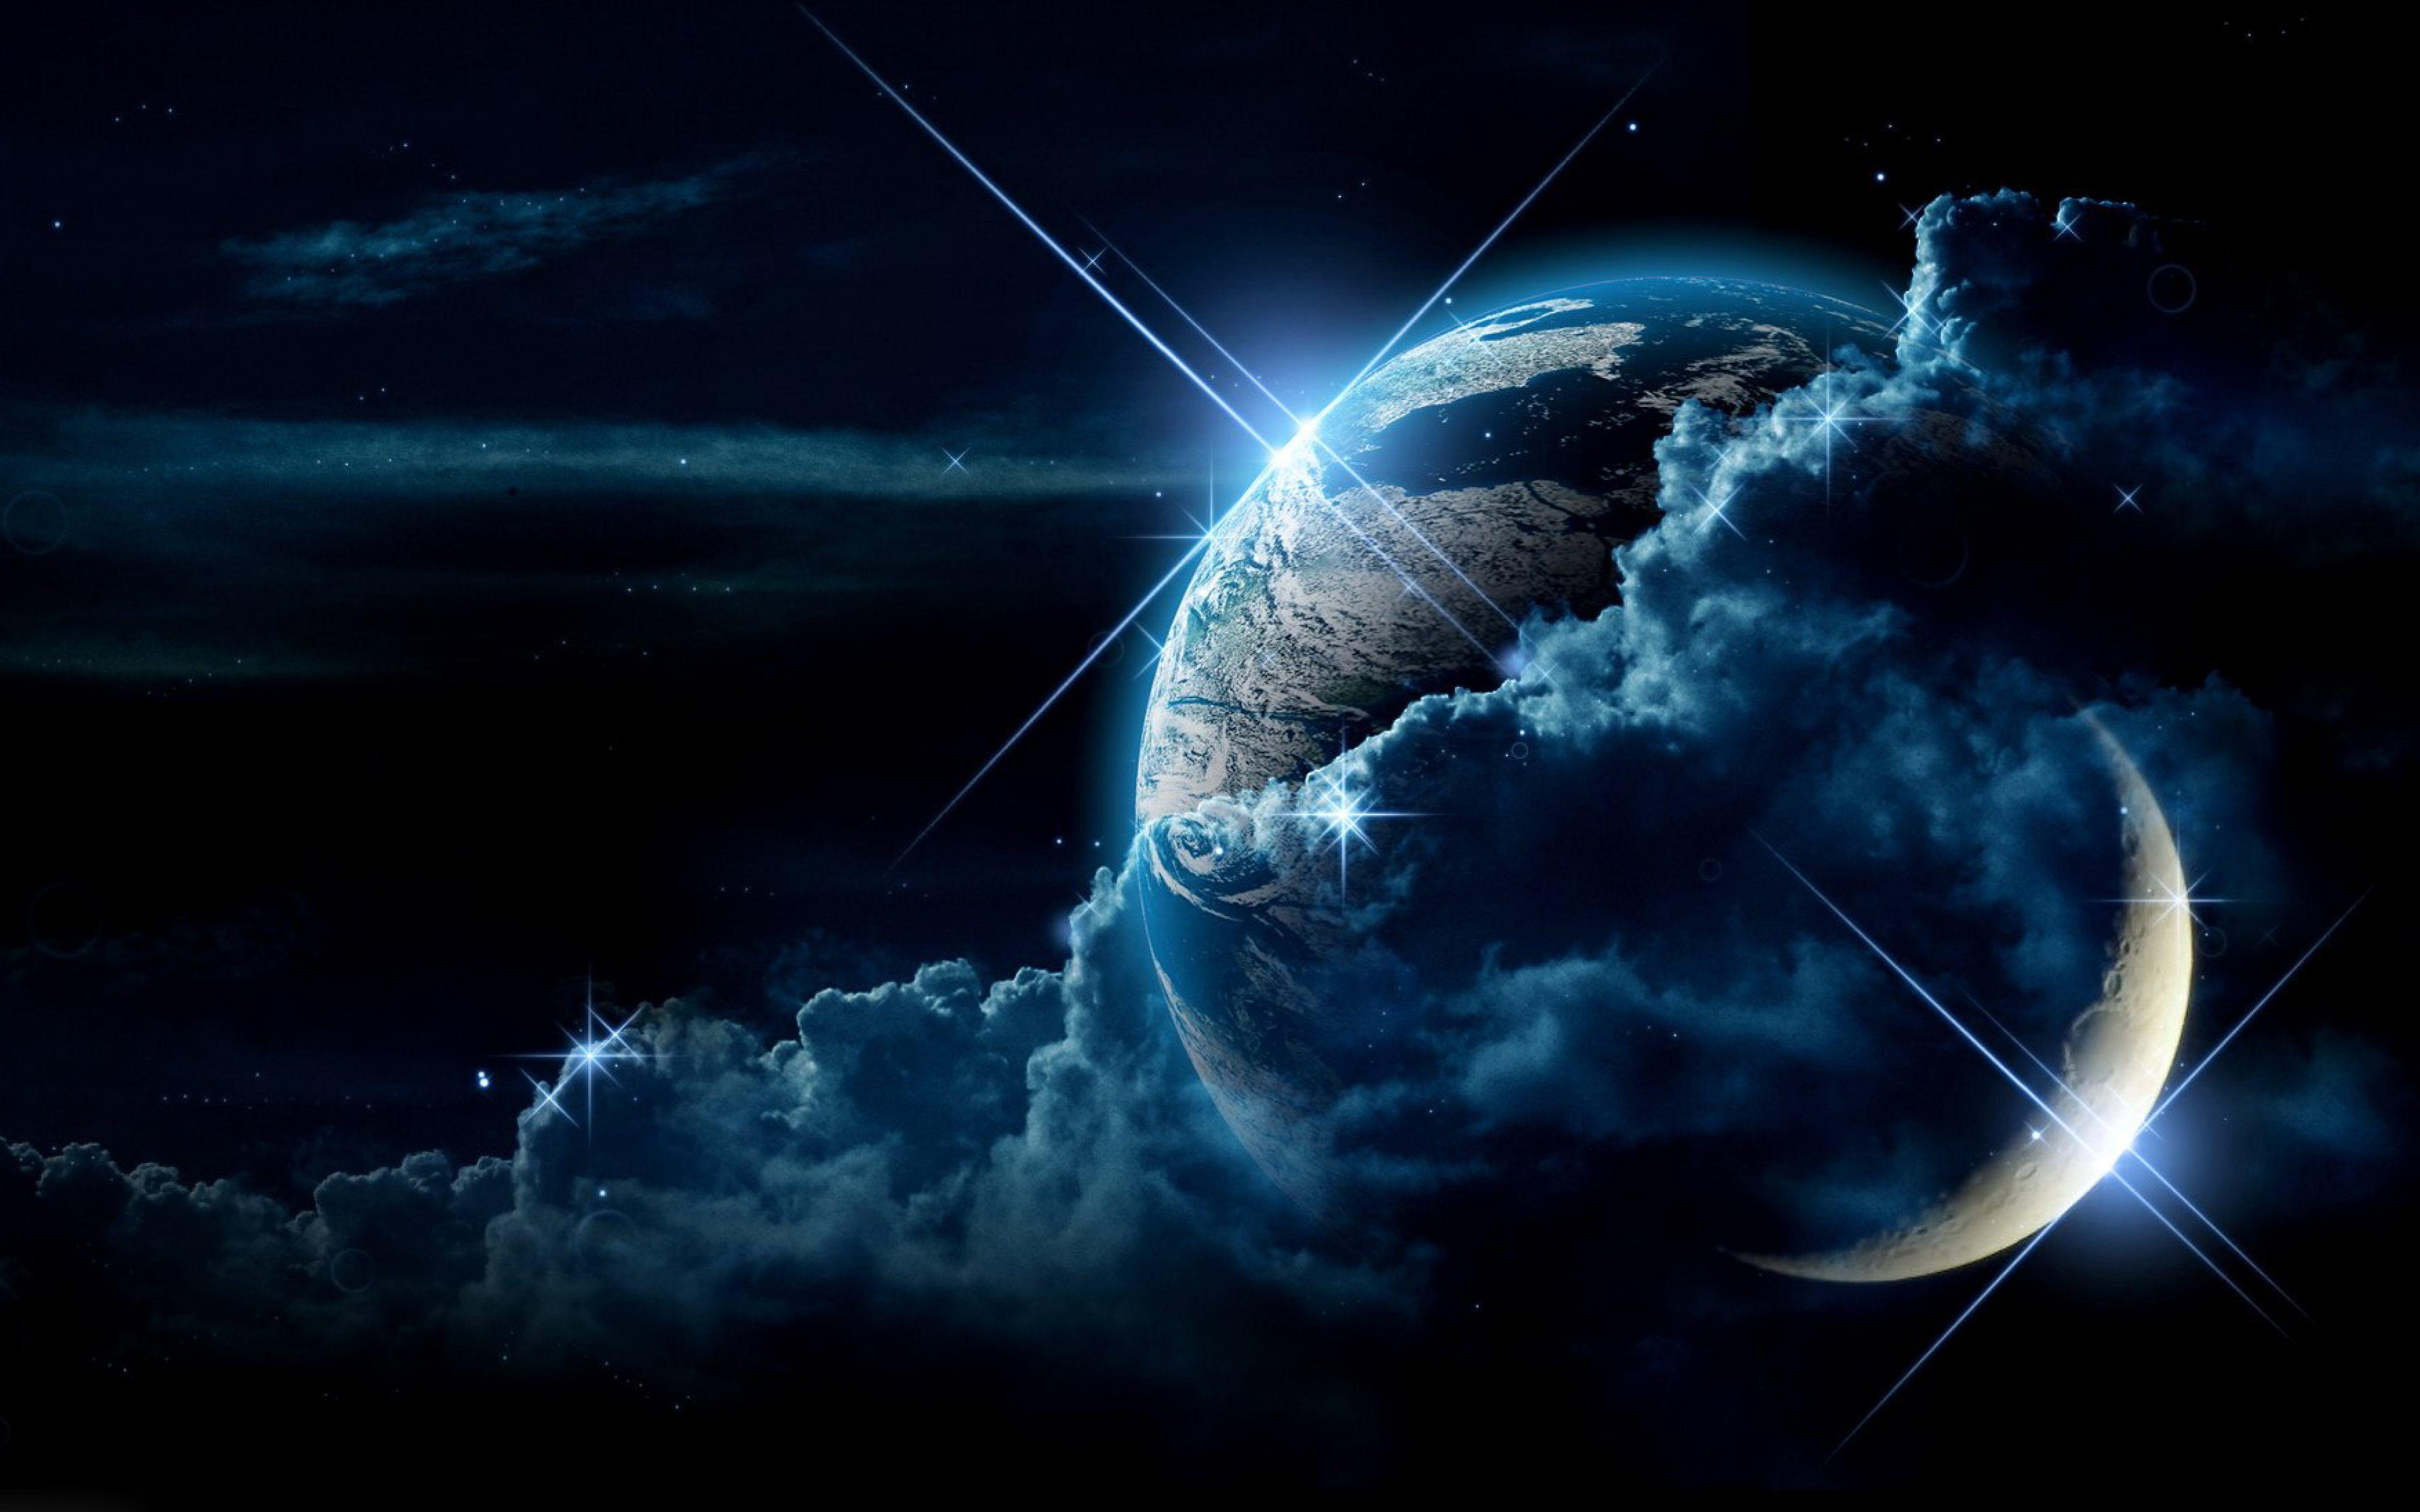 Earth and Moon in Space Wallpaper Download 4K Resolution. Cool background, Cool background pics, Night sky tattoos